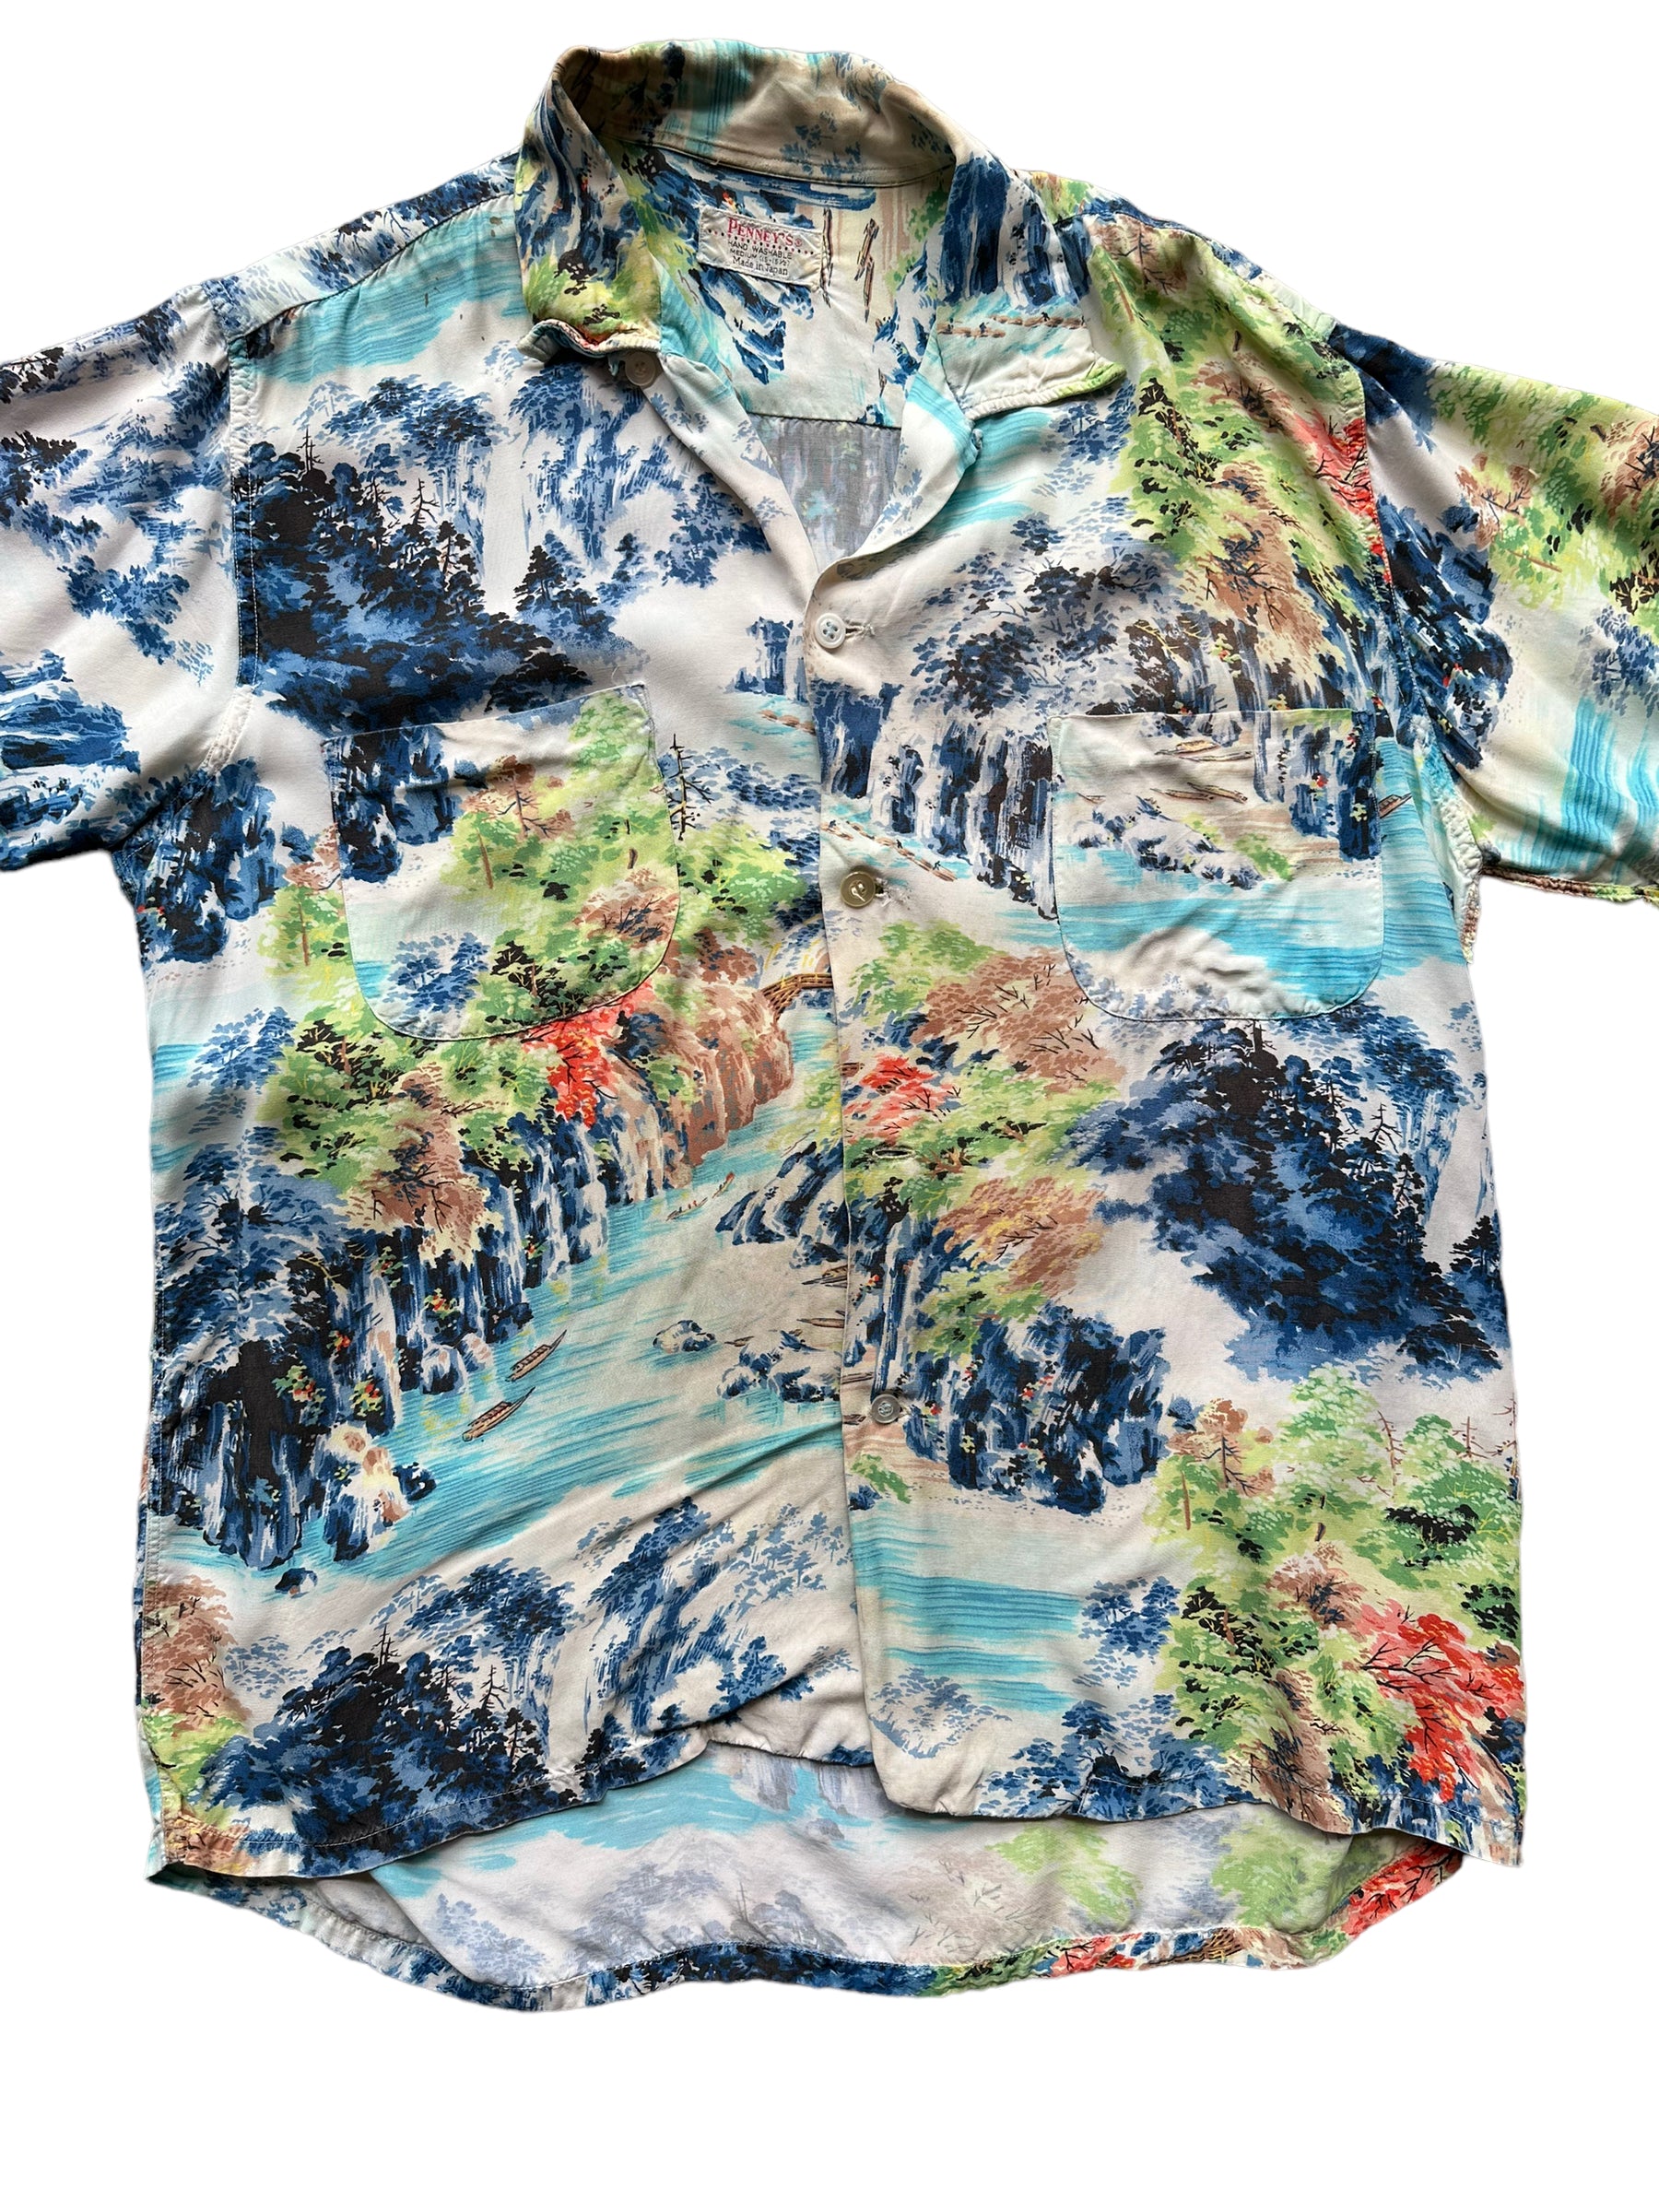 Front close up Vintage Made in Japan Penney's Navy/Blue/Green Landscape Aloha Shirt SZ M | Seattle Vintage Rayon Hawaiian Shirt | Barn Owl Vintage Clothing Seattle